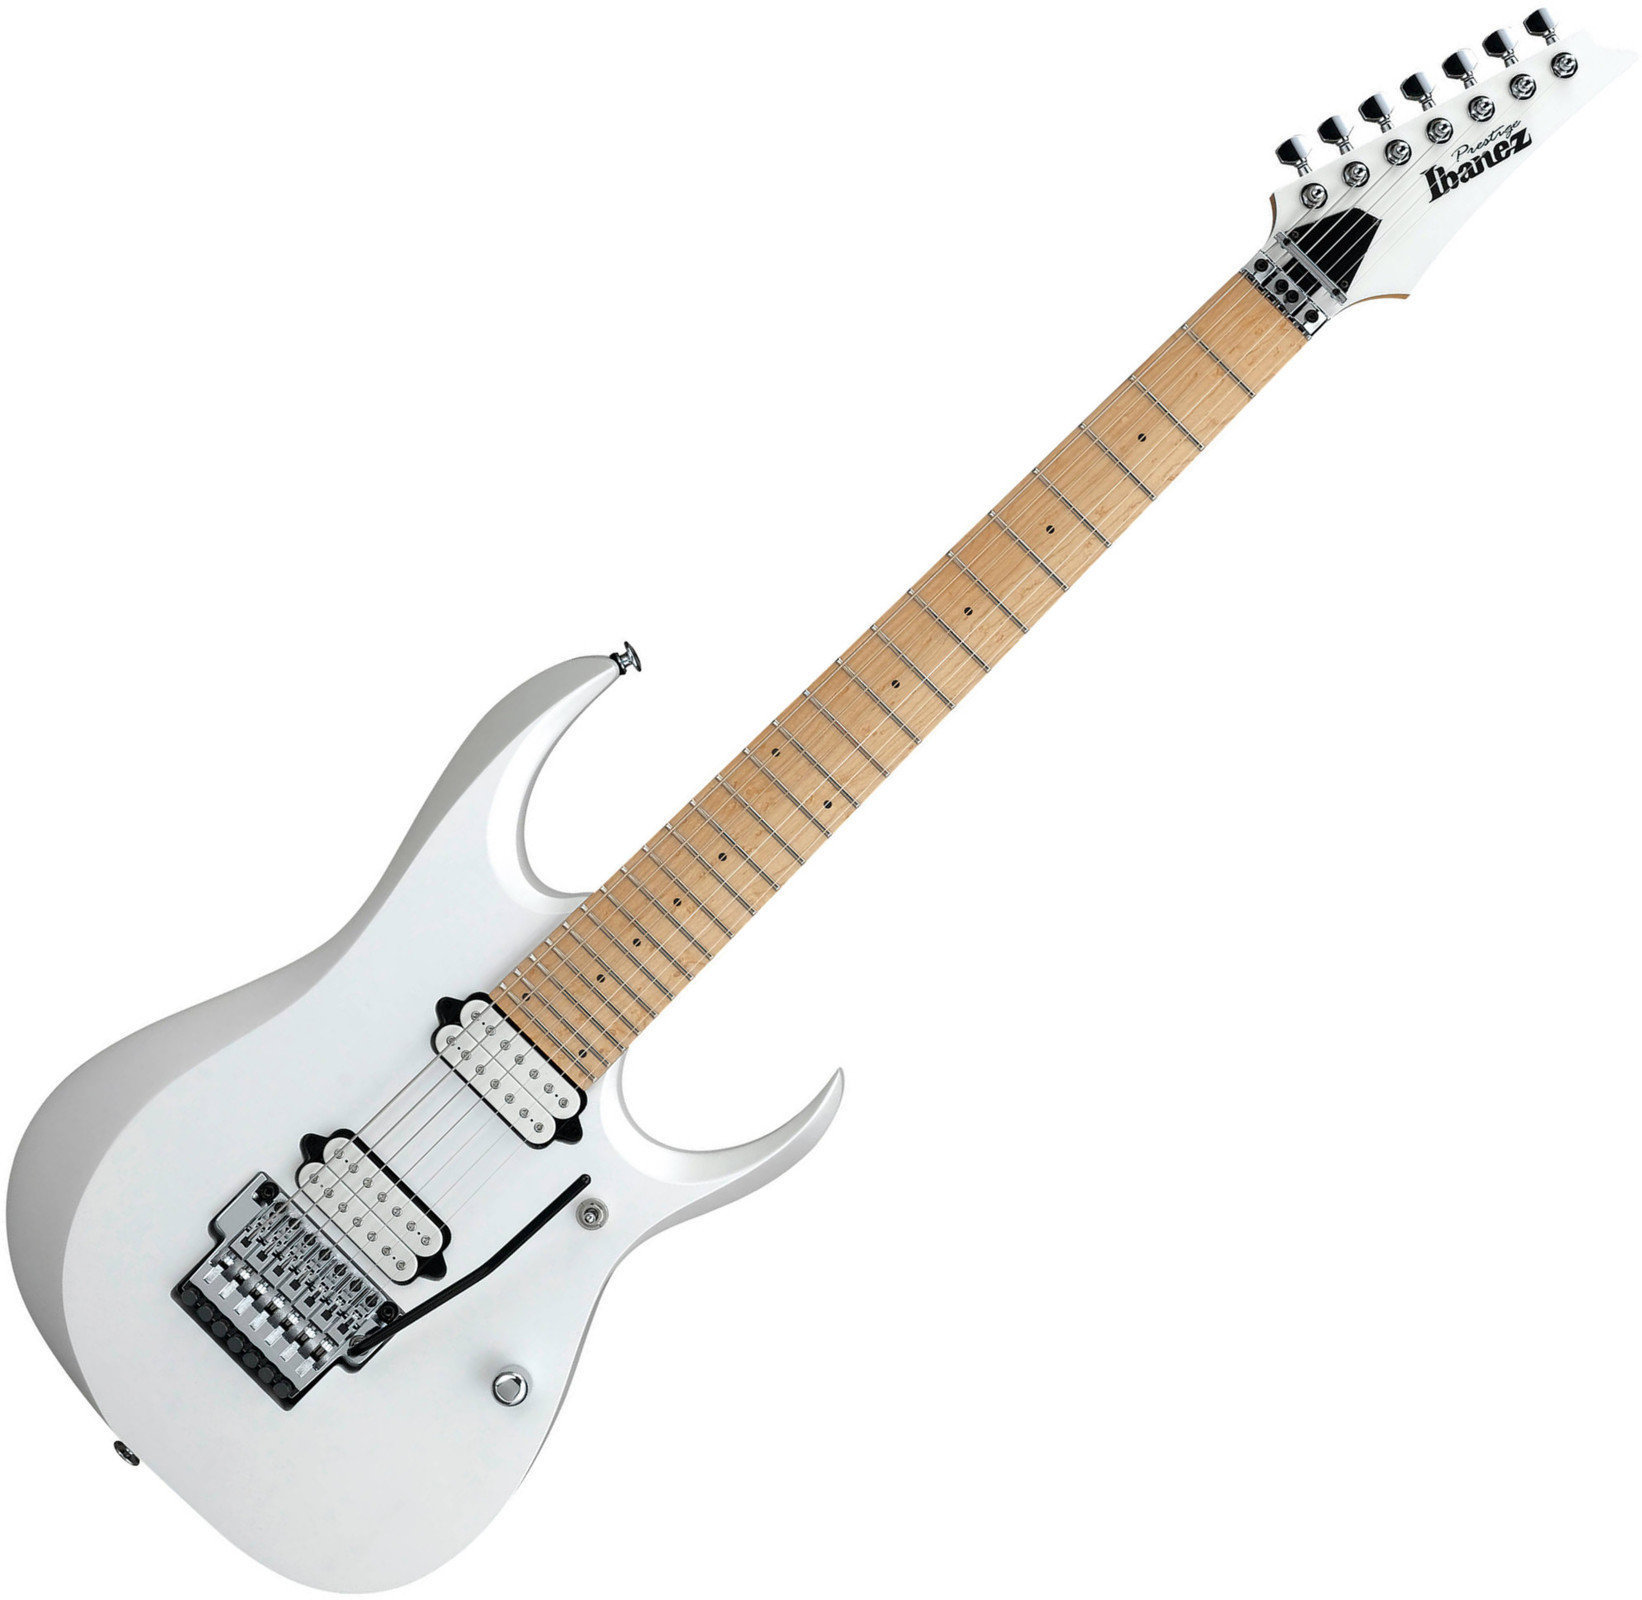 7-string Electric Guitar Ibanez RGD3127-PWF Pearl White Flat